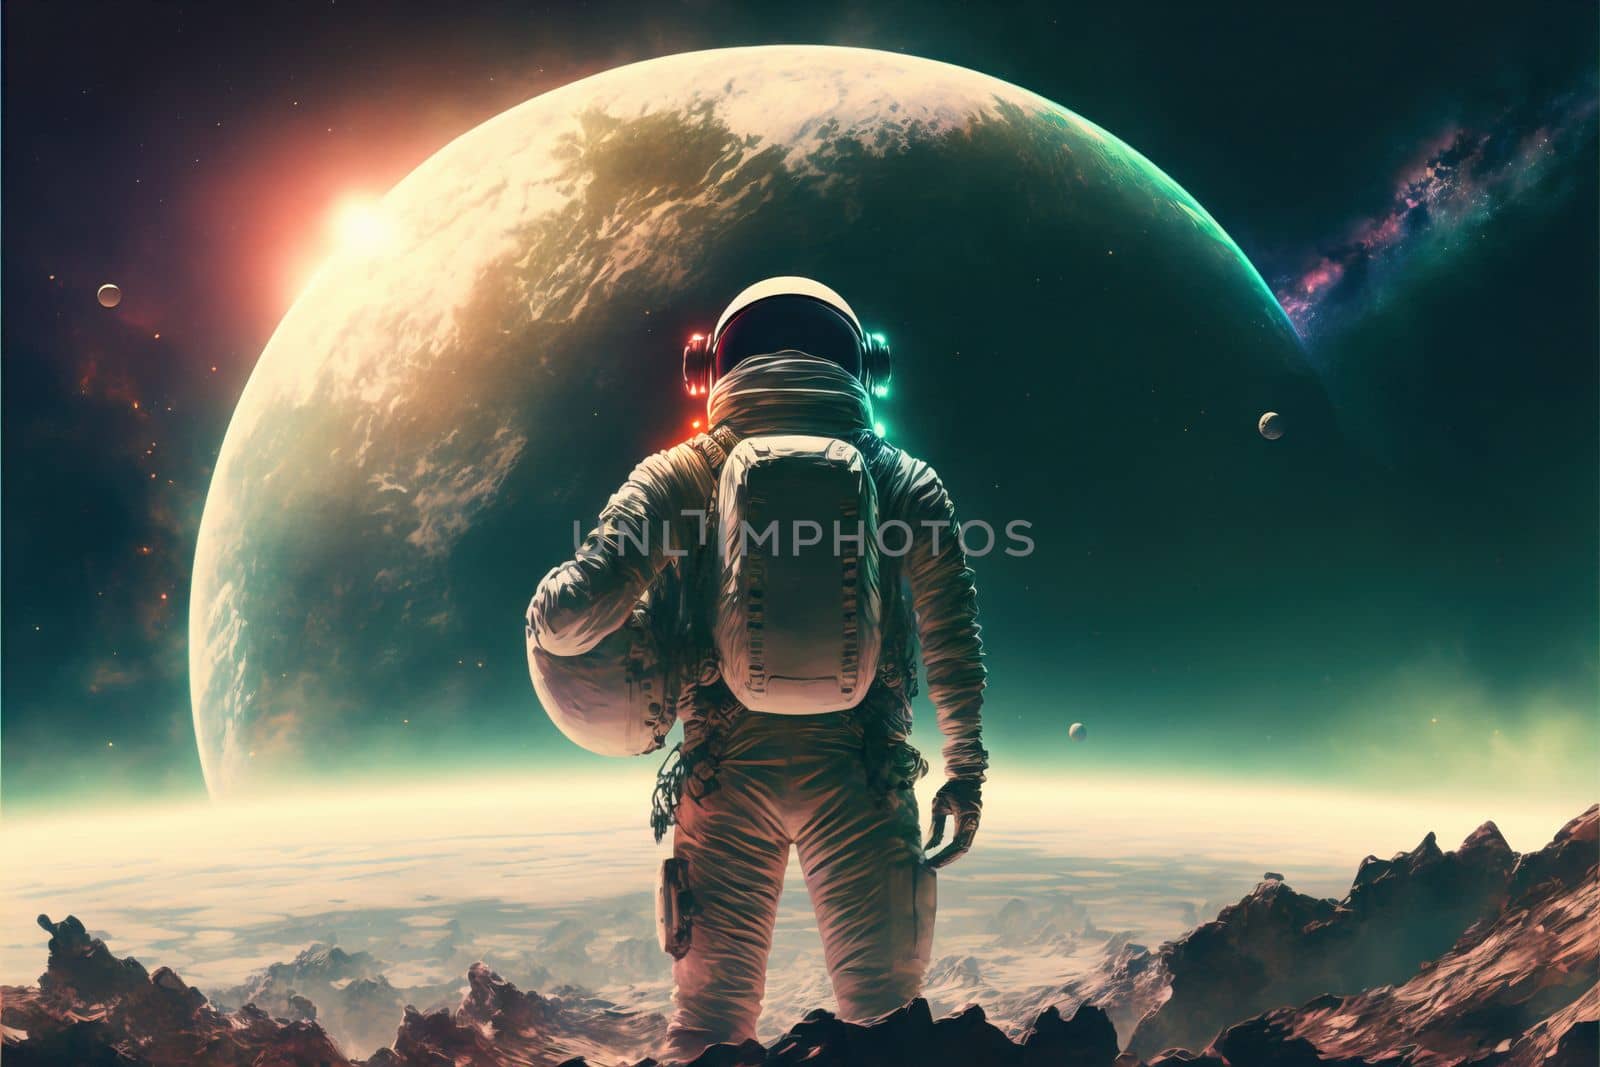 Illustration of Astronaut on Planet Watching on moon with sunrise. Future First Manned Mission To planet, Technological Advance Brings Space Exploration, Colonization. download image